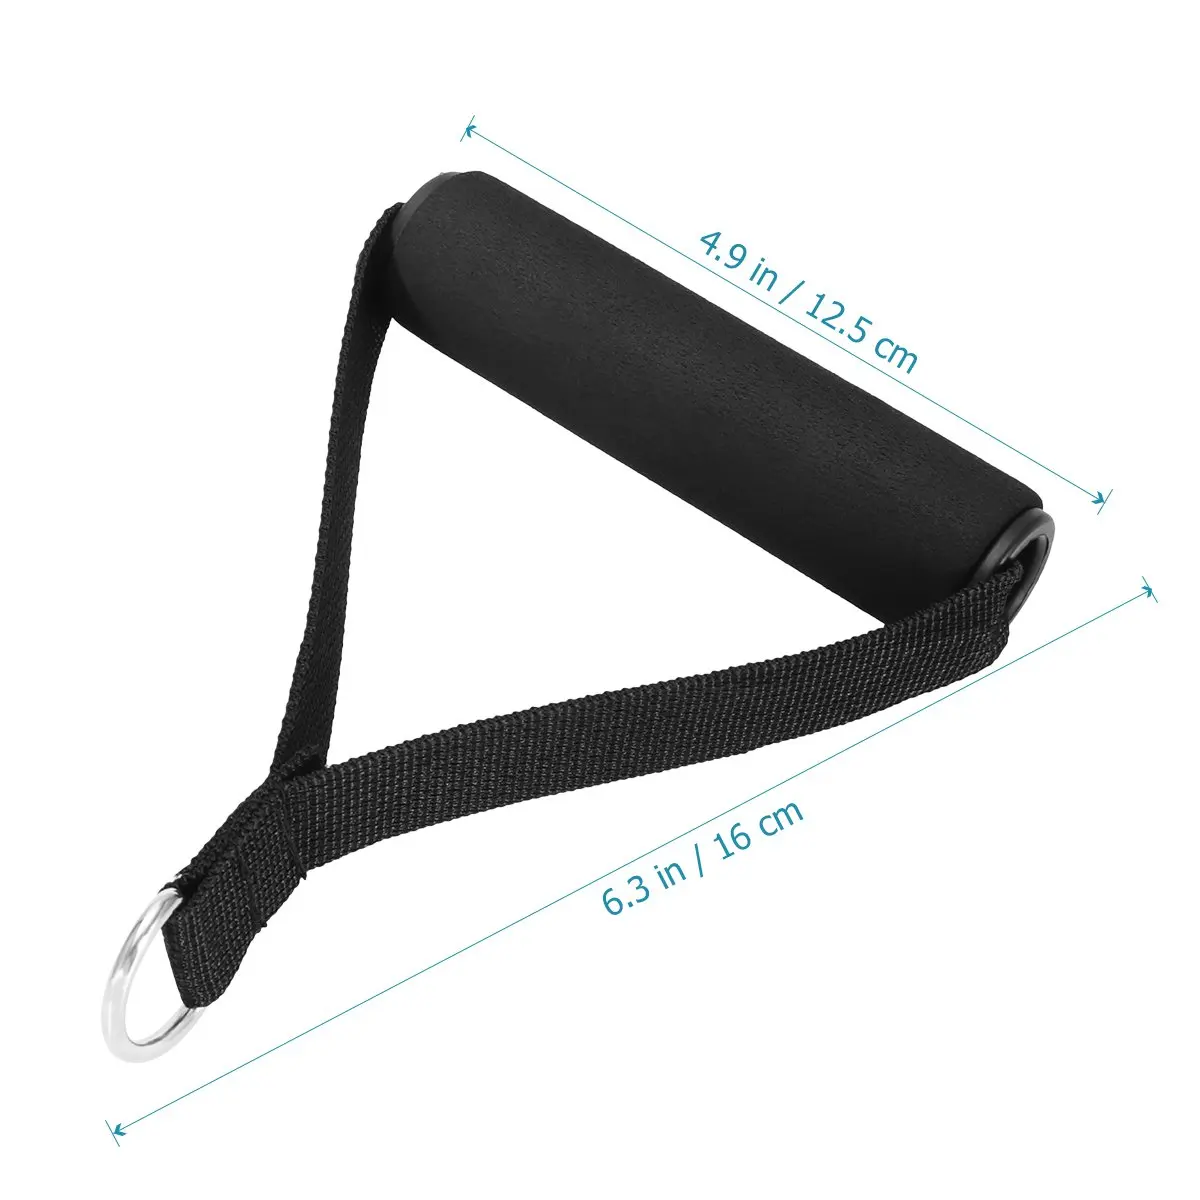 Exercise Resistance Bands Handle Door Anchor Fitness Workout Home Gym Pull up Assist Bands Gear Kinetic Simplify Accessories